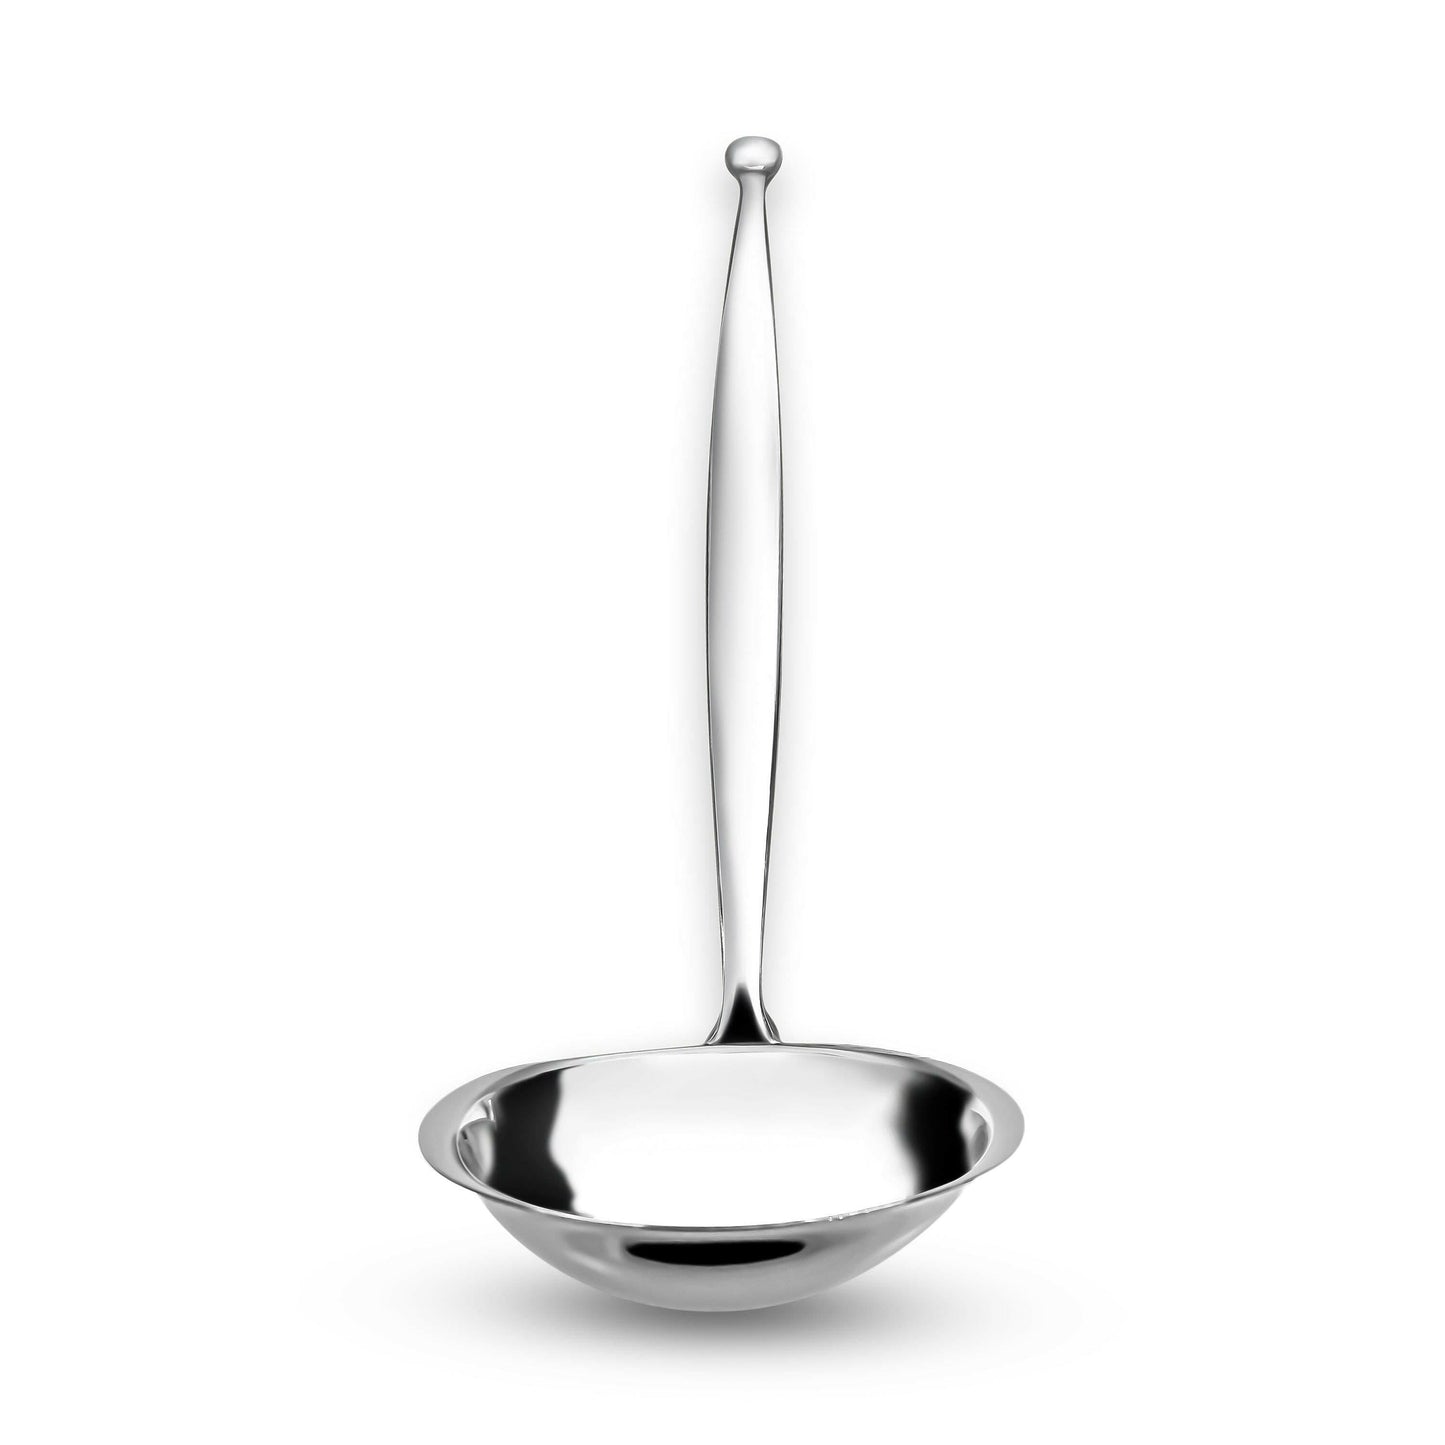 Elia Jester Soup Ladle 18/10 Stainless Steel